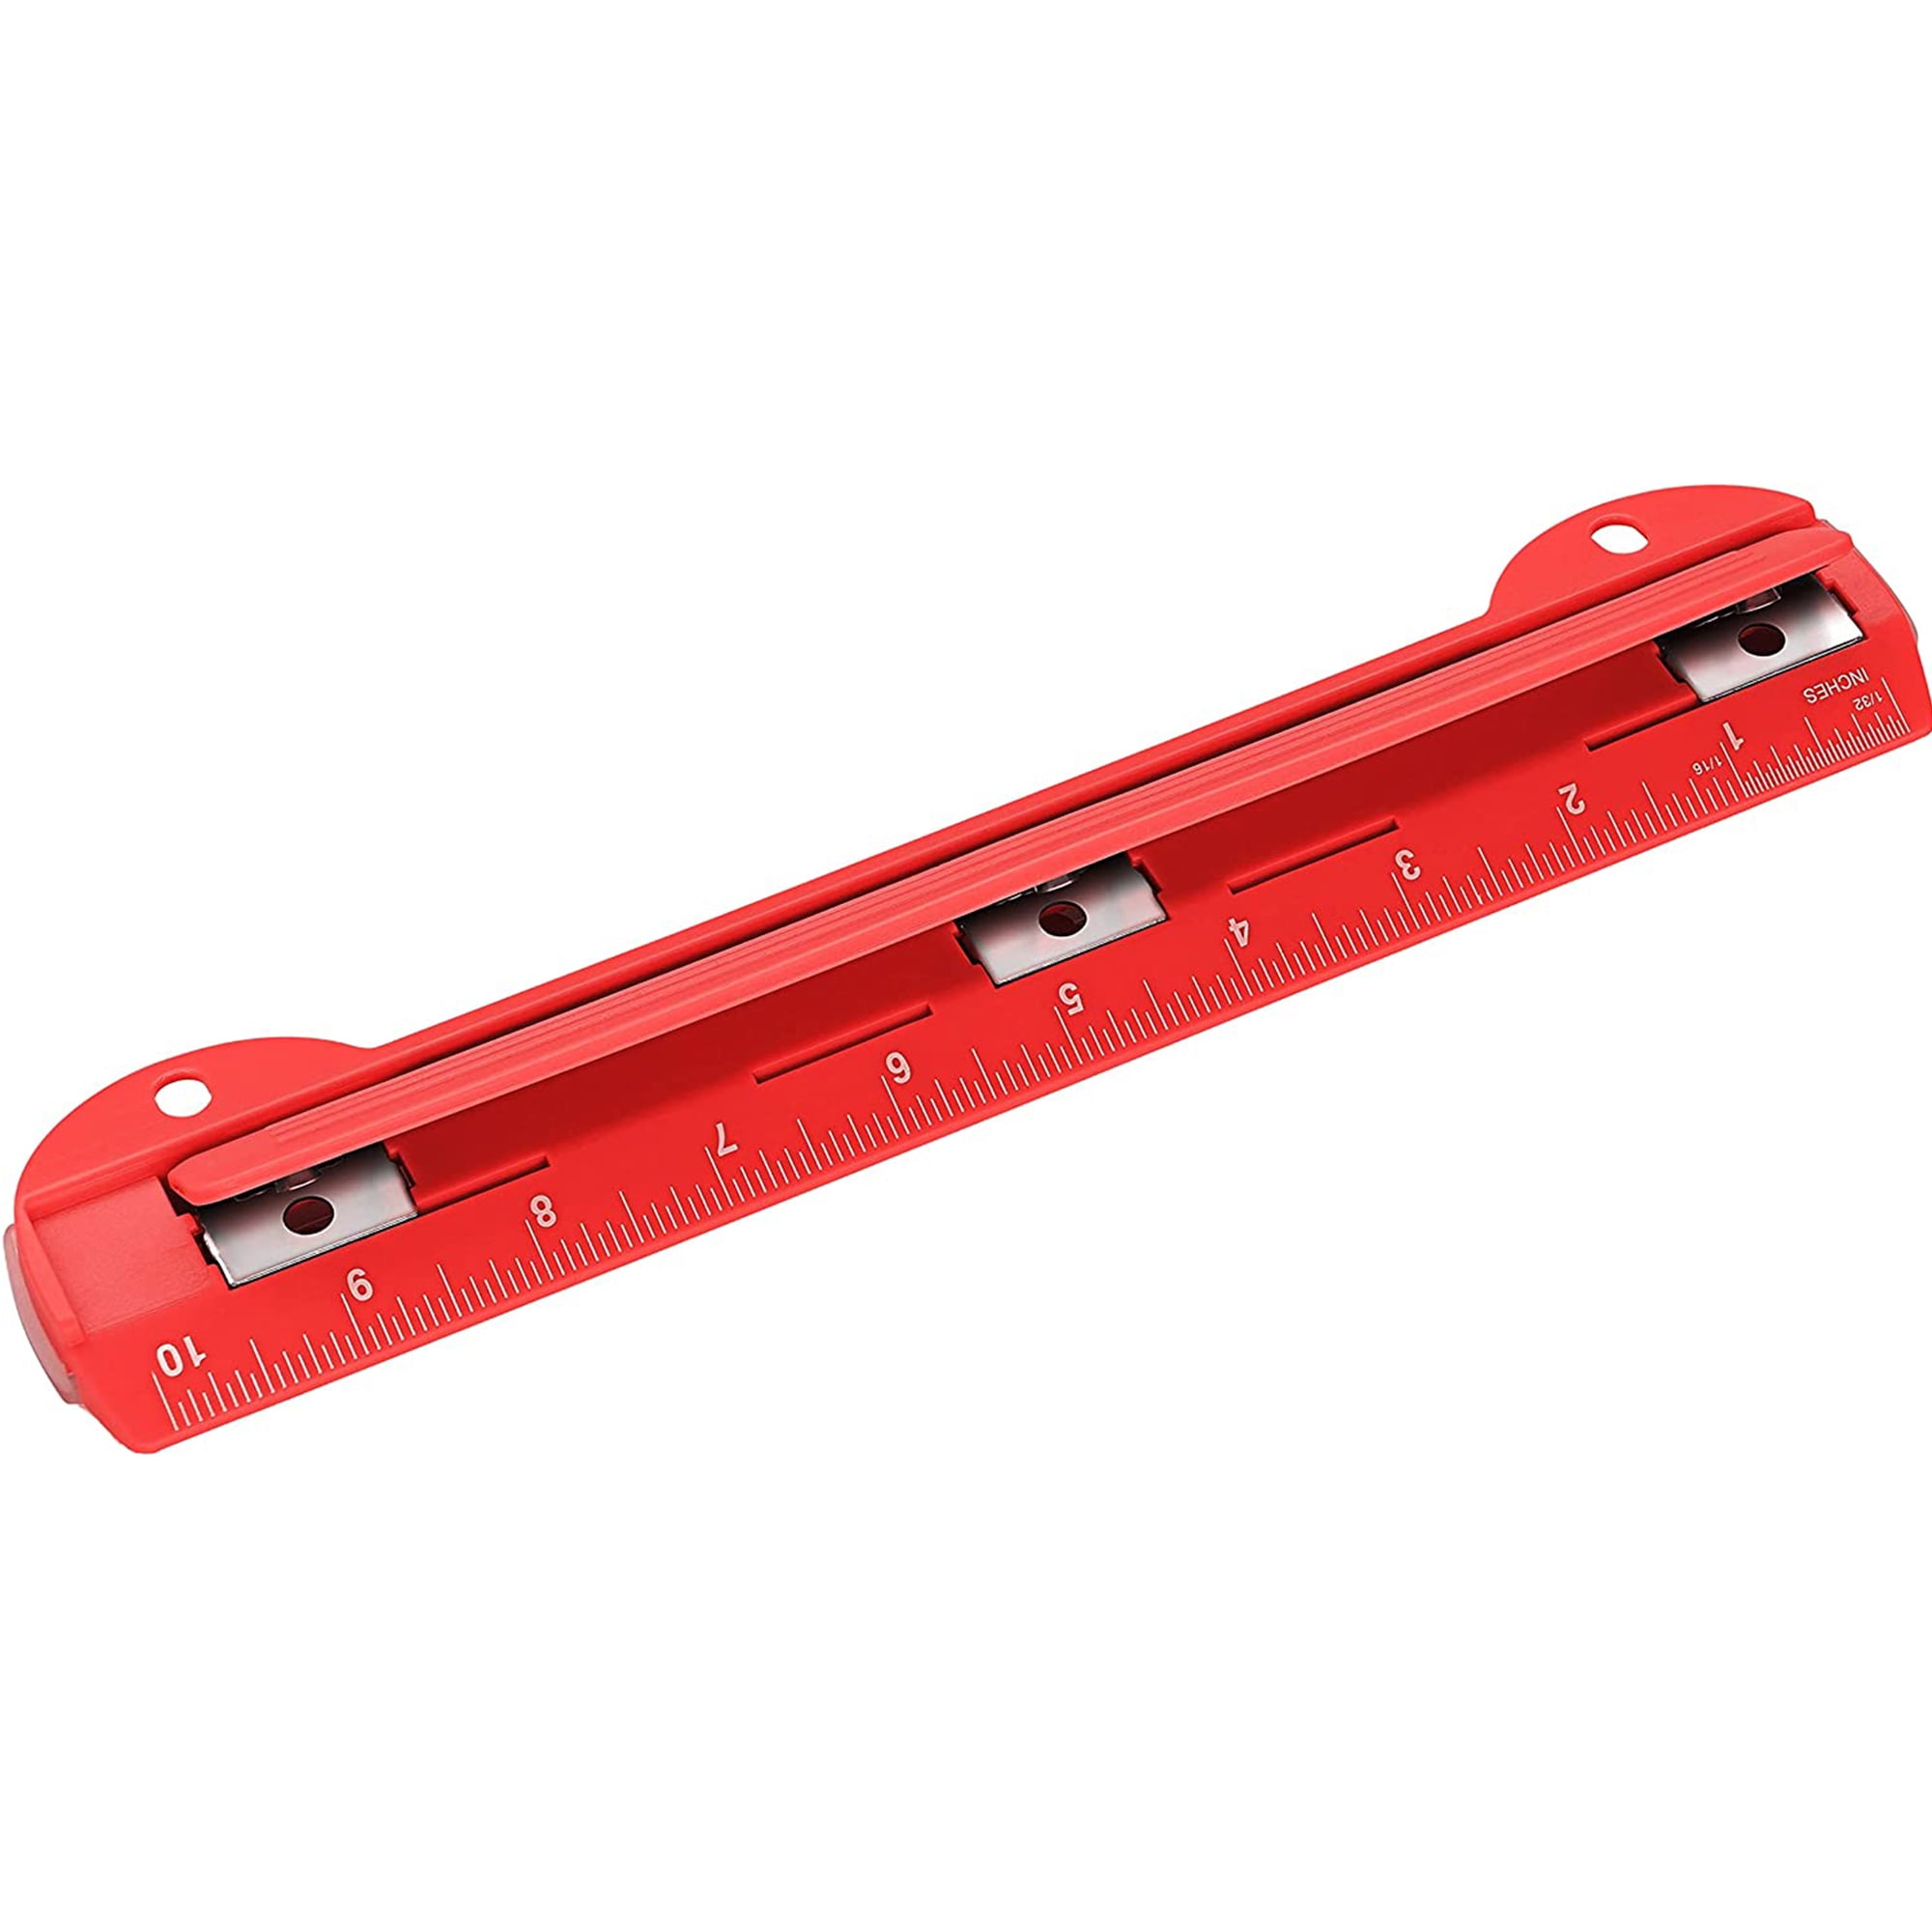 Enday 3 Ring Hole Punch with Plastic Ruler for 3 Ring Binder, Red